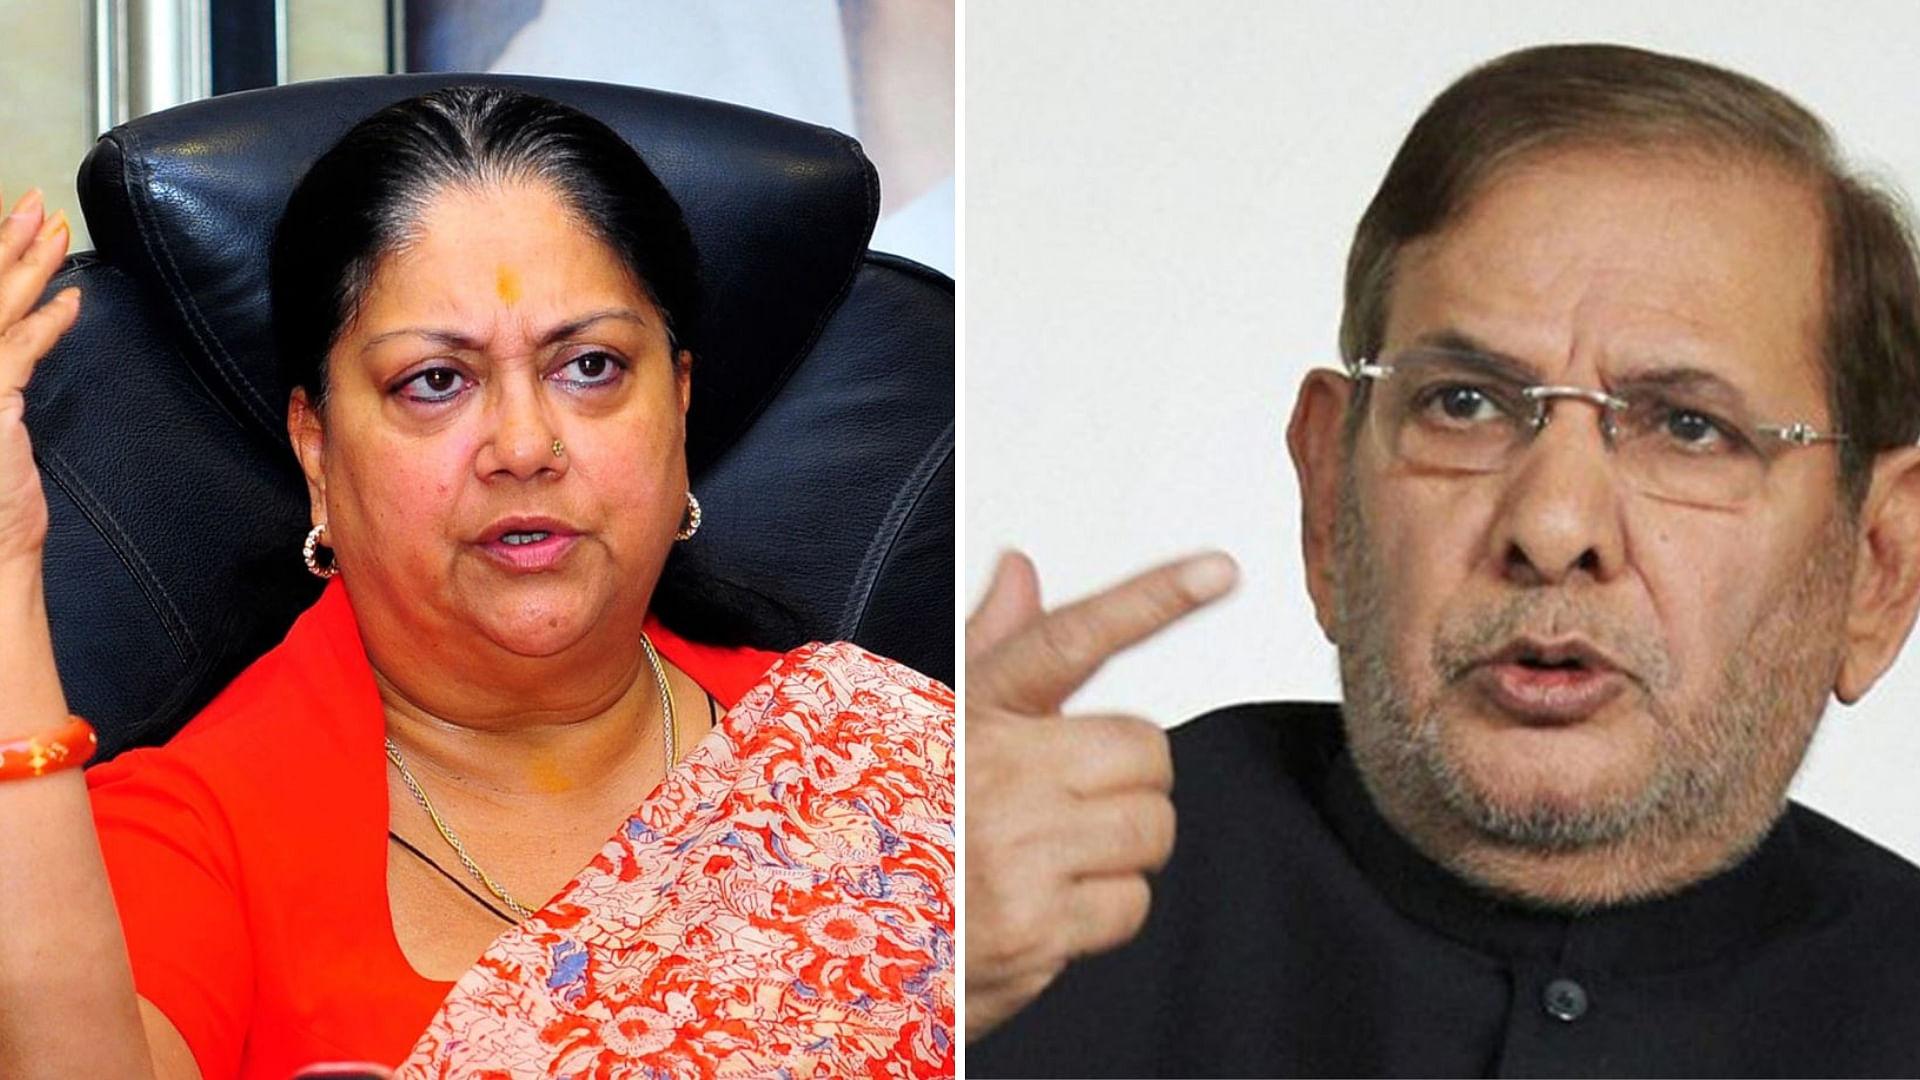 Vasundhara Raje asked EC to take action against Sharad Yadav for his controversial remark on the CM’s “weight”.